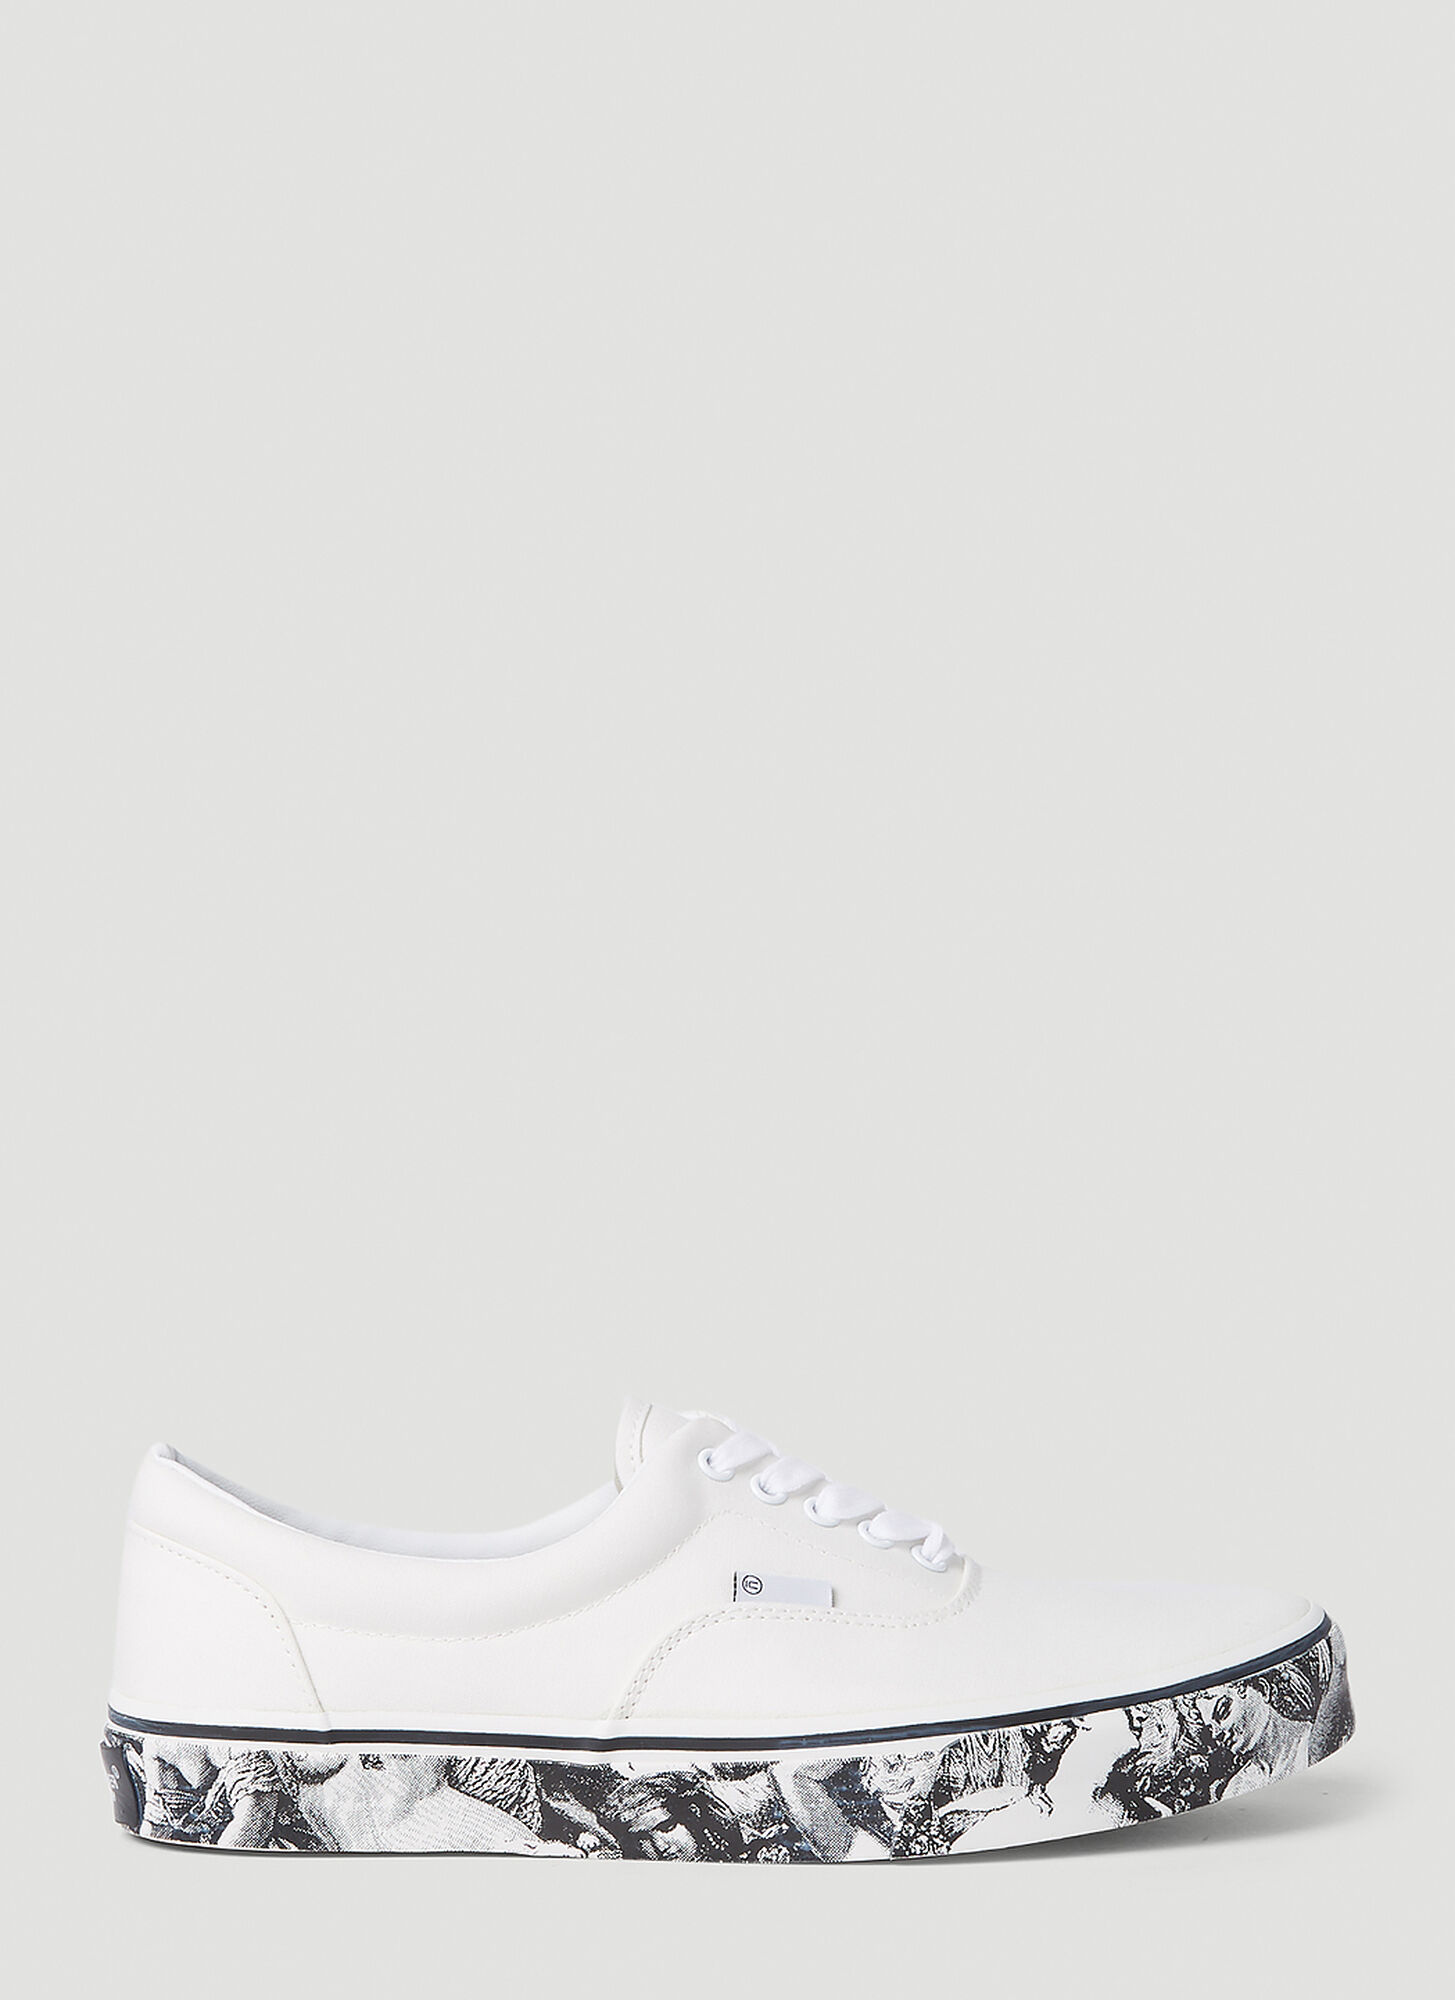 Undercover Graphic Sole Trainers In White